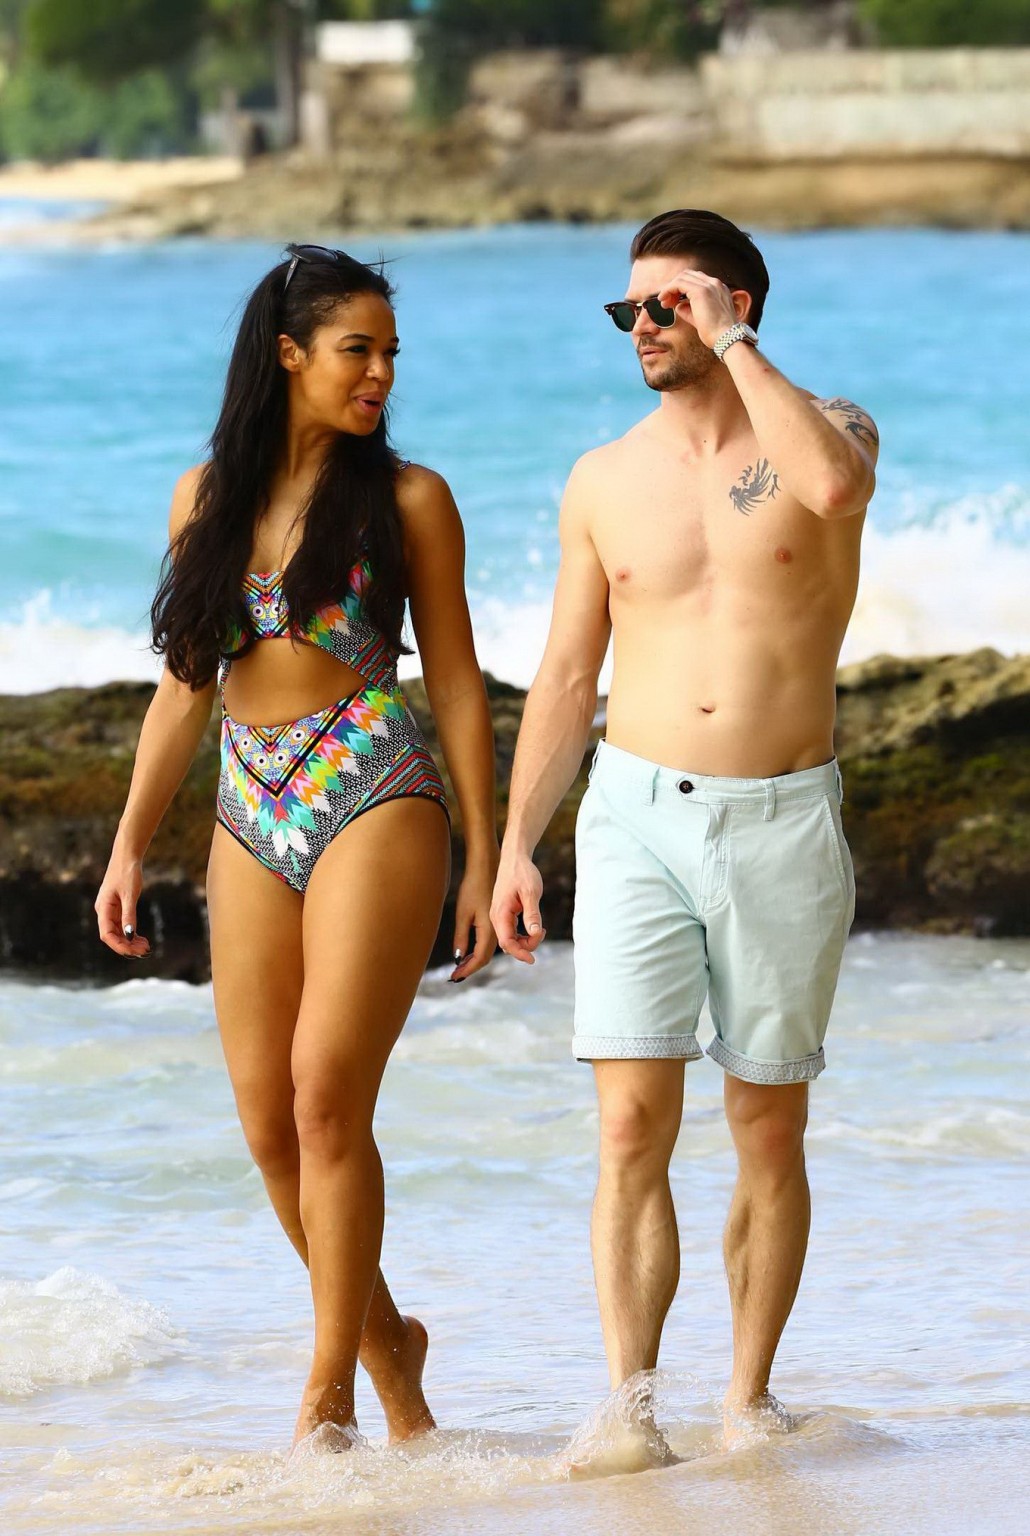 Sarah Jane Crawford shows off her seductive curves in a colorful swimsuit at the #75176849